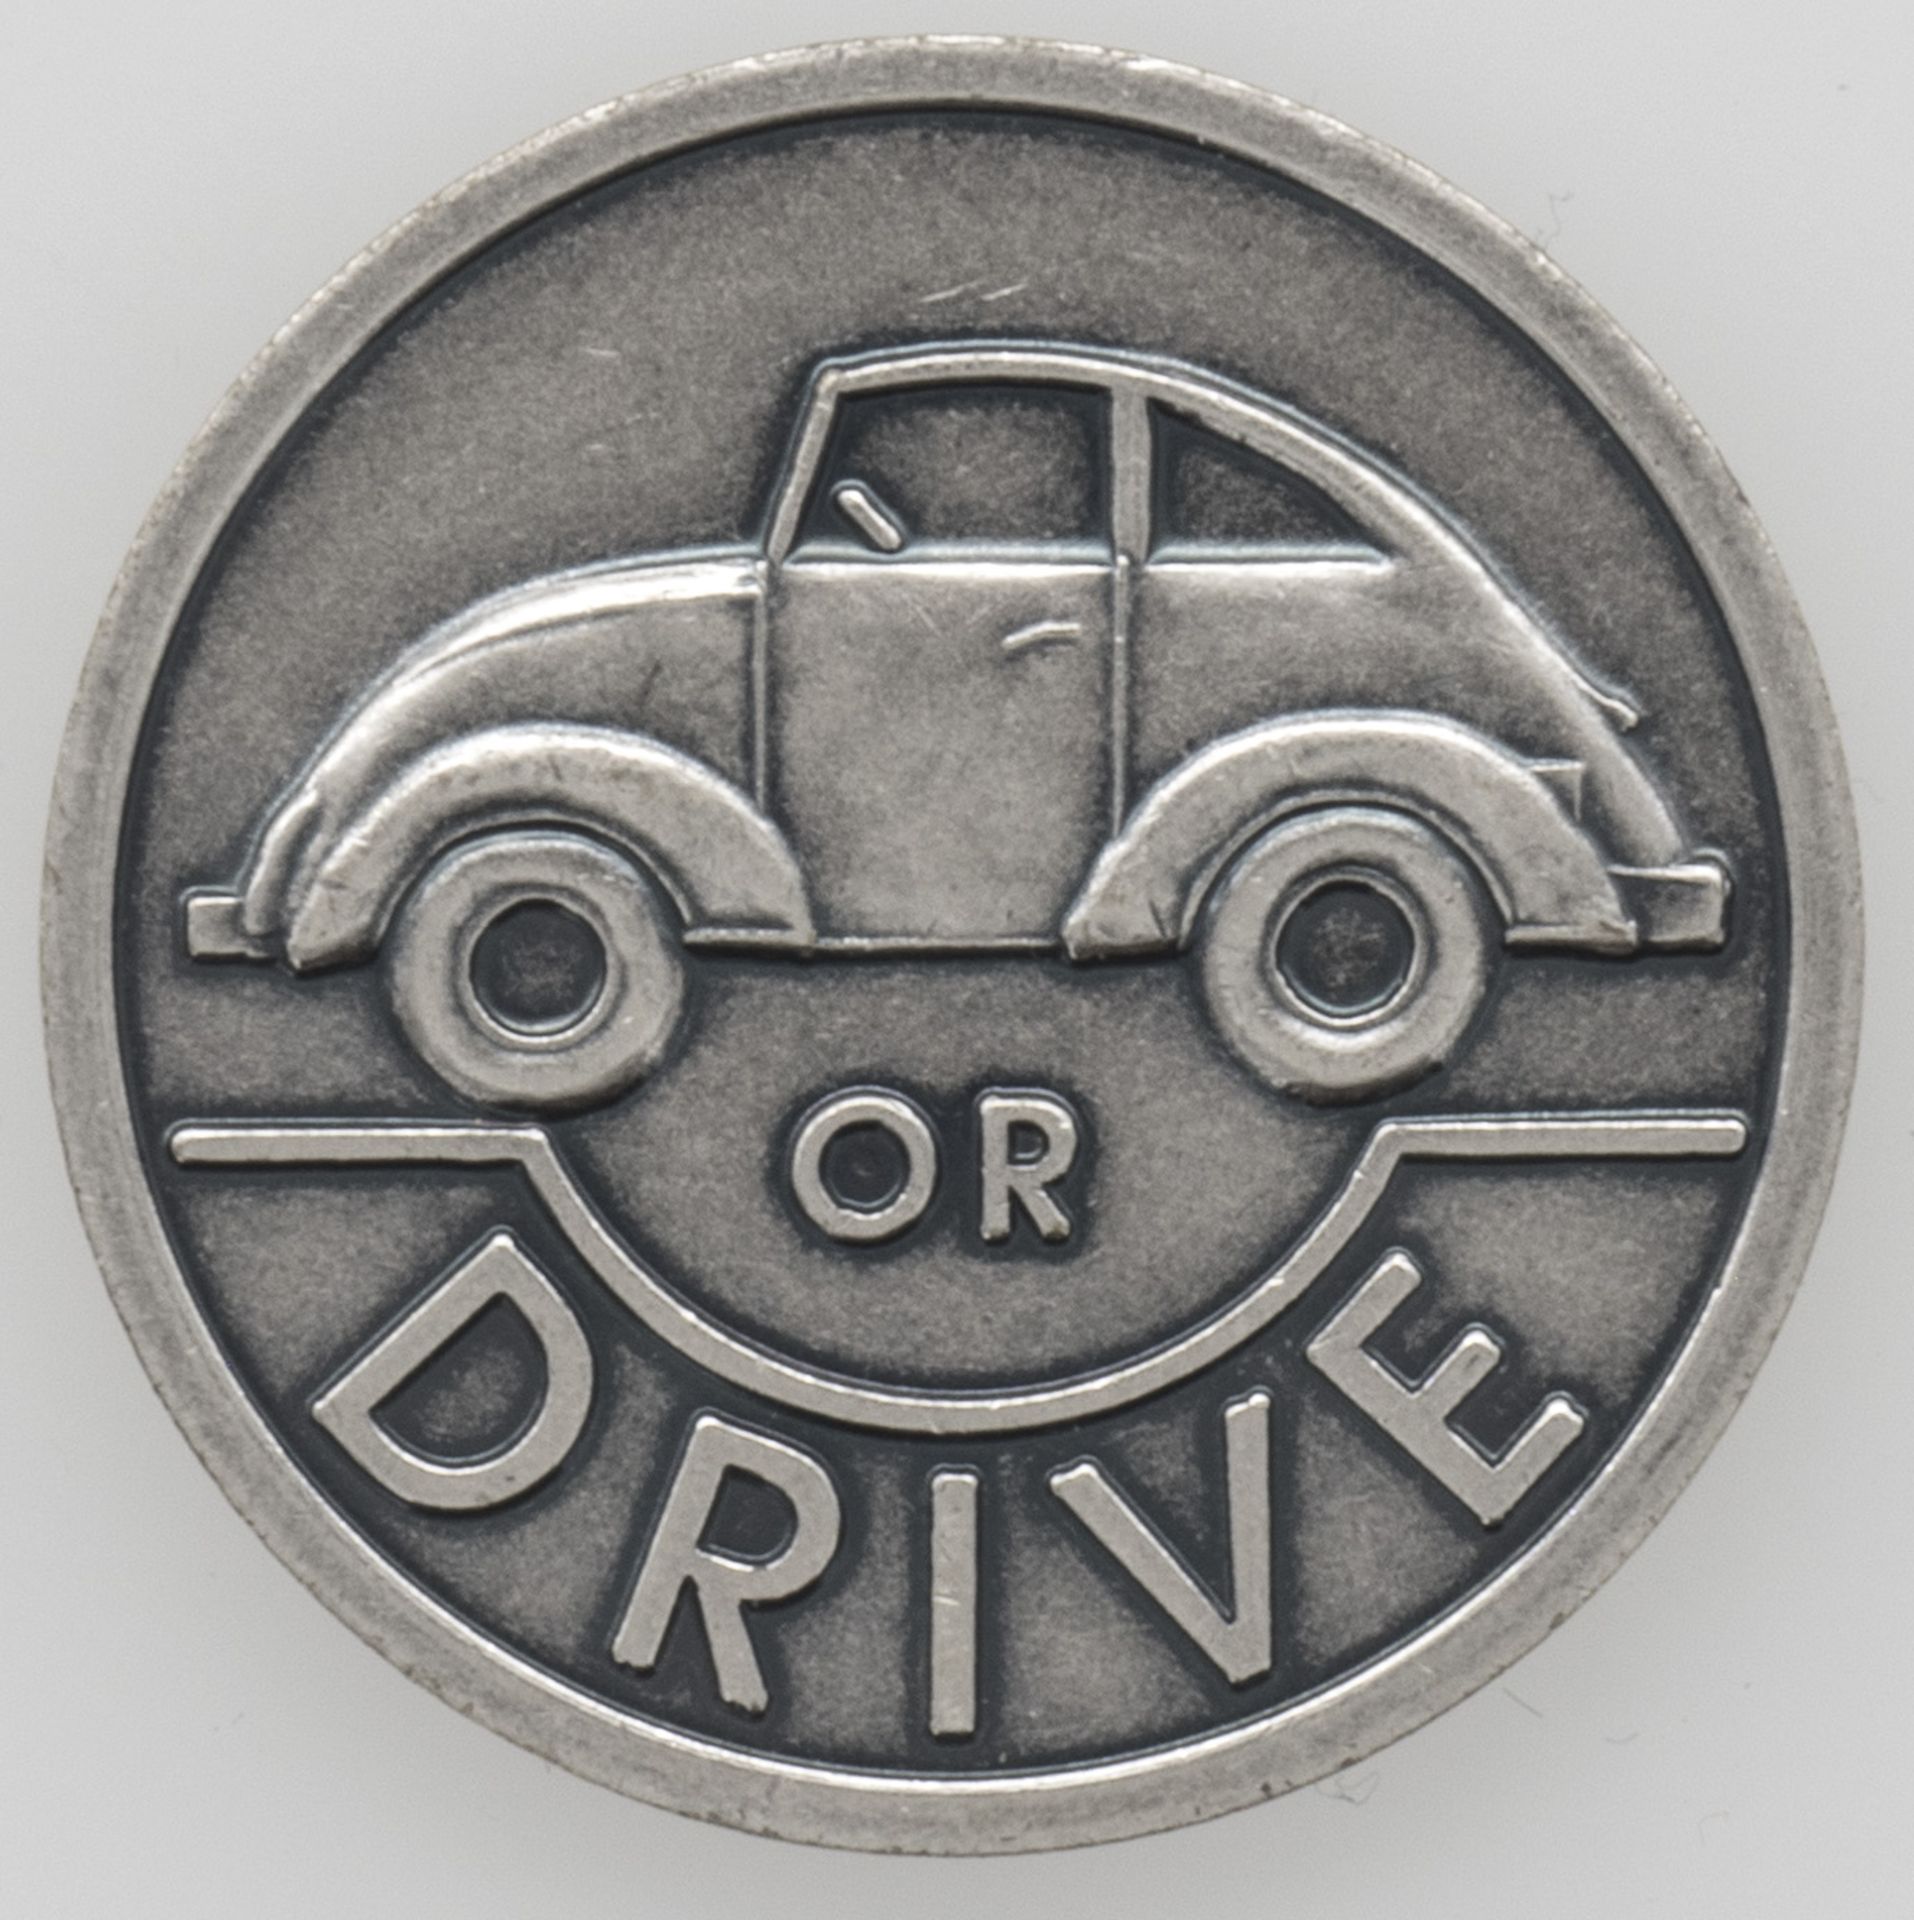 Medaille "Drink or drive" - Image 2 of 2